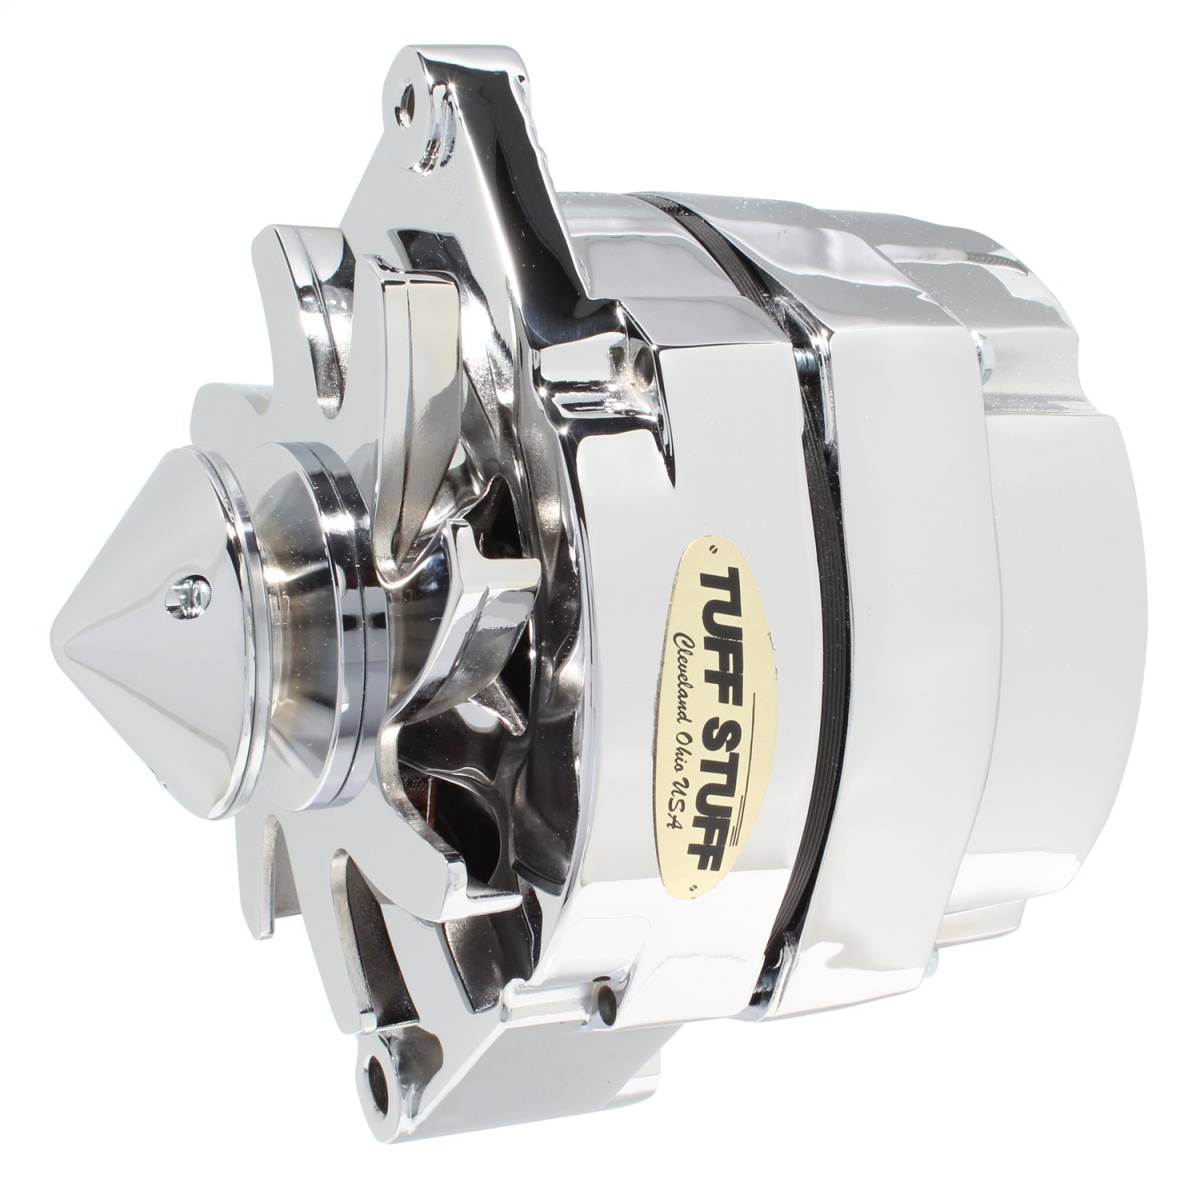 Tuff Stuff Performance - Silver Bullet Alternator 100 AMP OEM Or 1 Wire V Groove Bullet Pulley 4.85 in. Case Depth Lower Mount Boss 2 in. Long Polished 9 Clocking 7139BBULL9